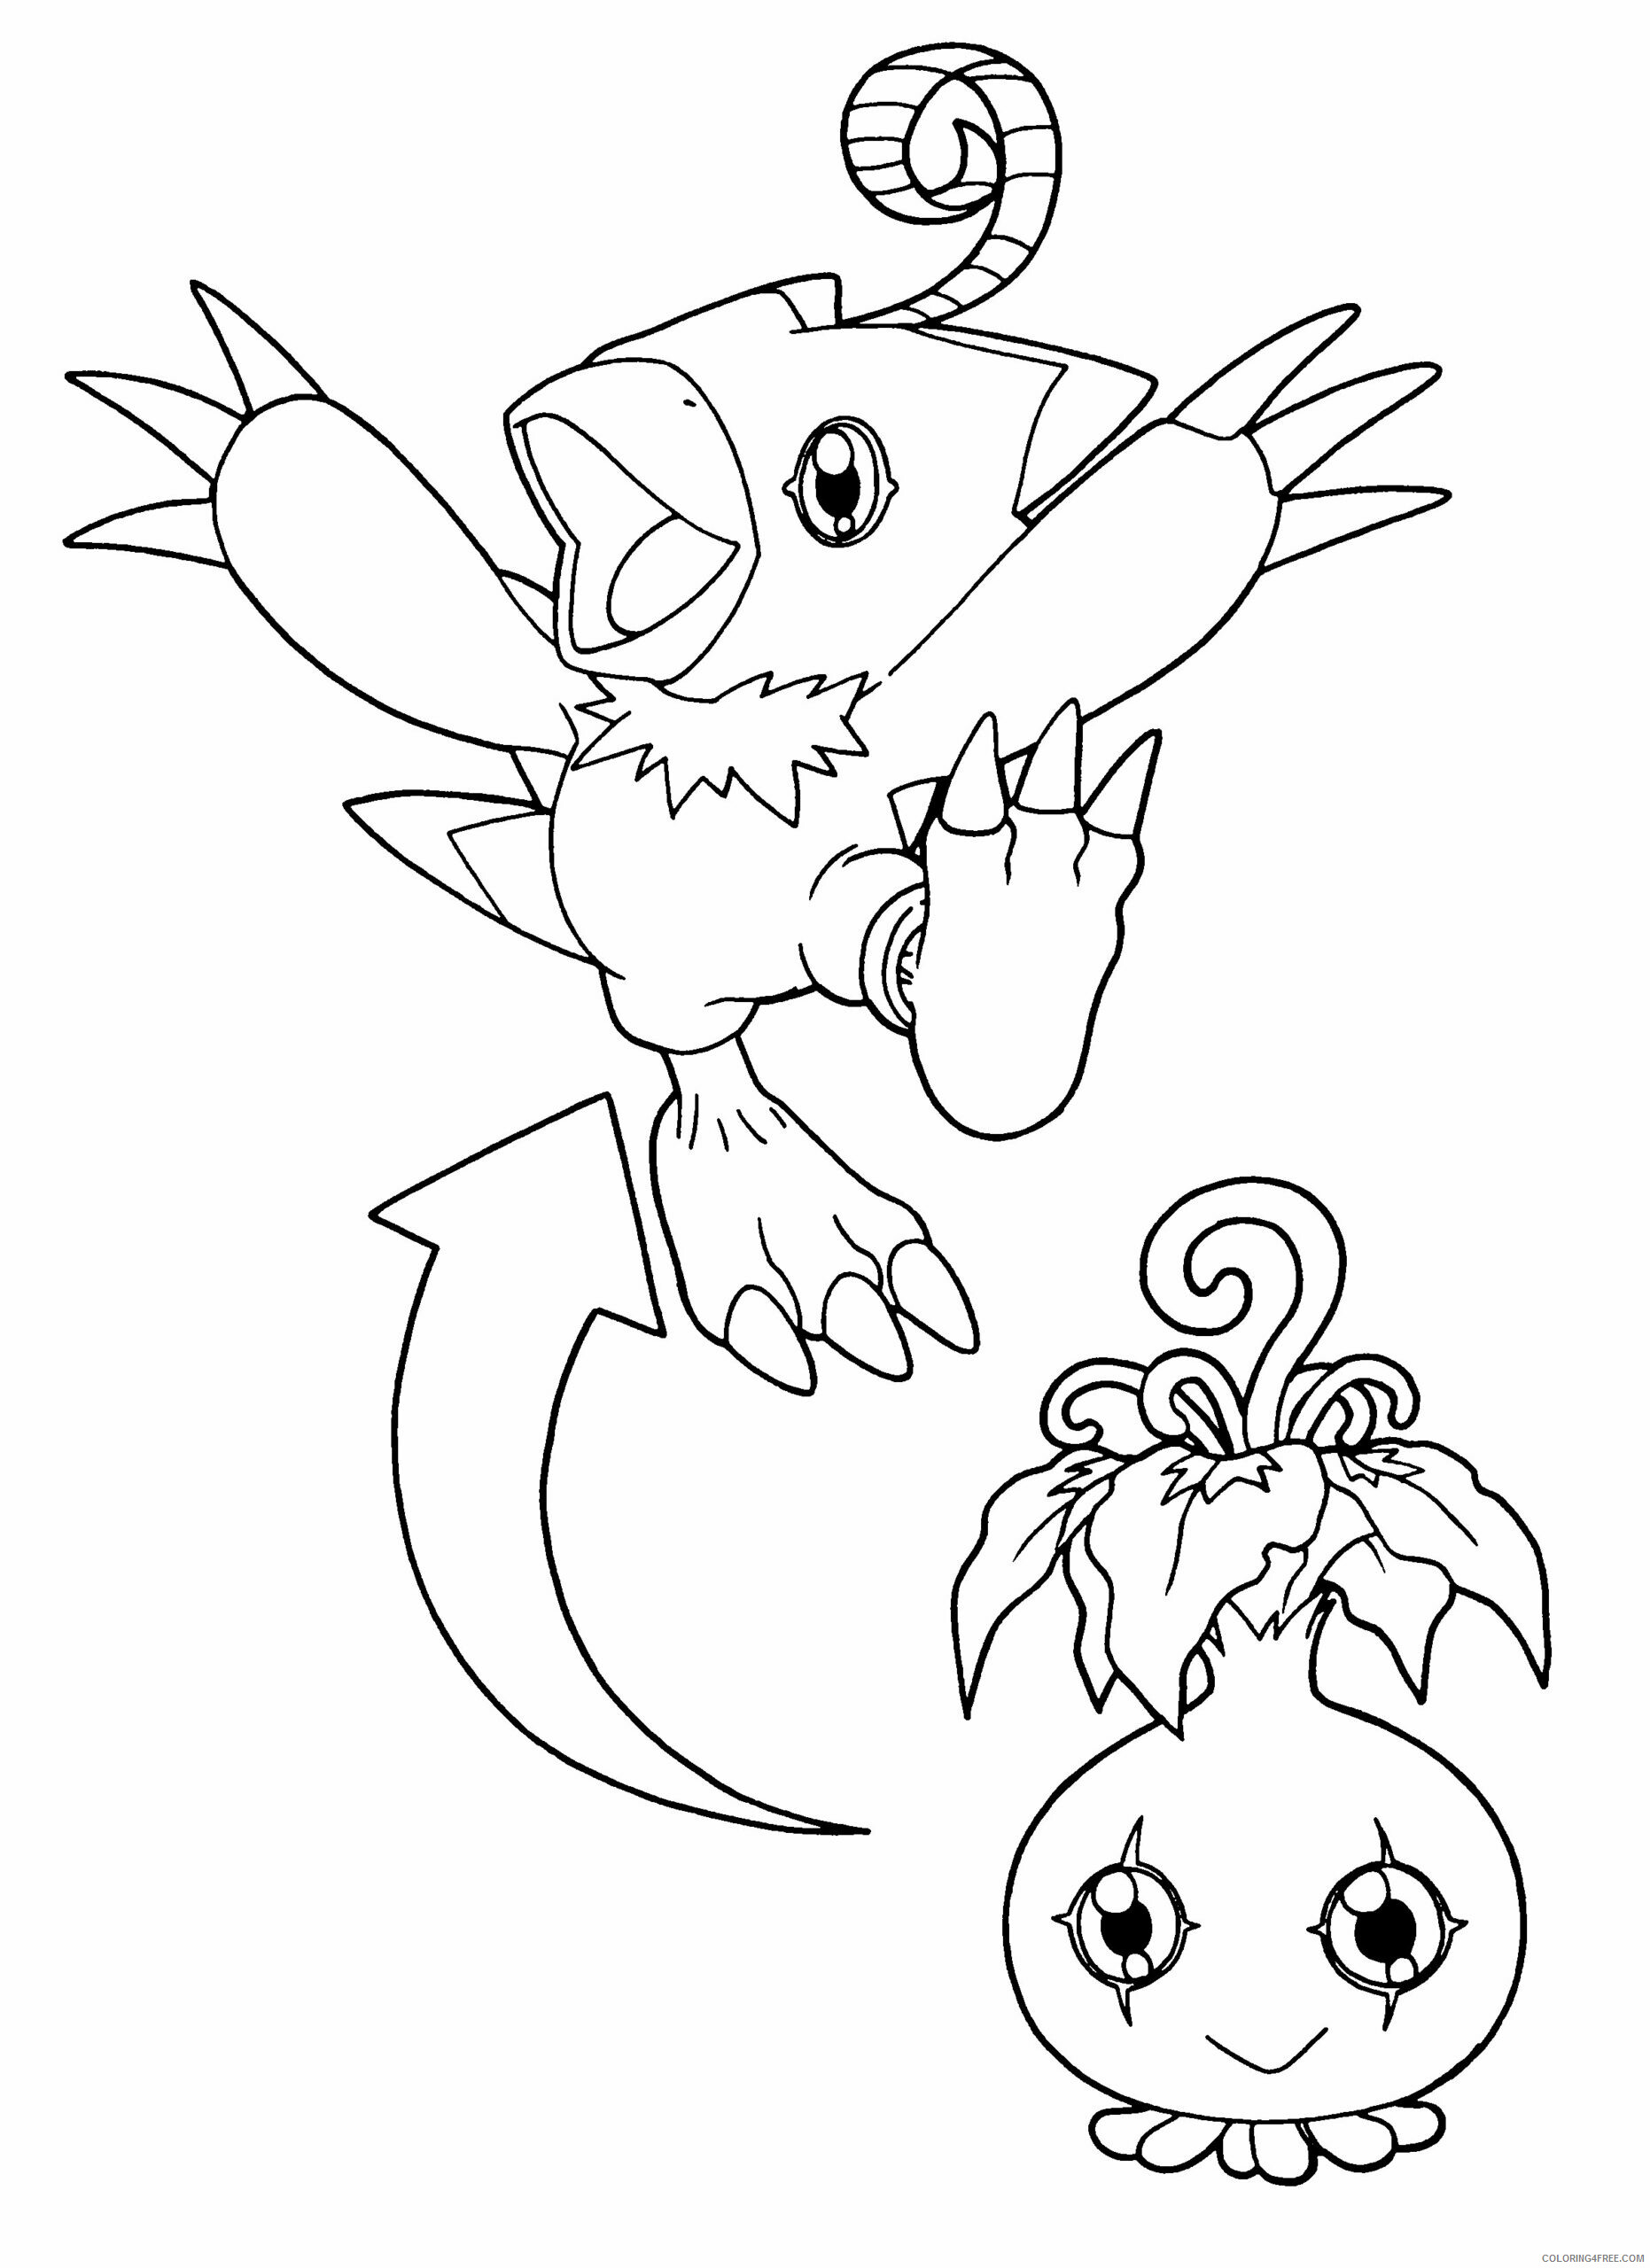 Digimon Printable Coloring Pages Anime digimon 97 2021 0394 Coloring4free